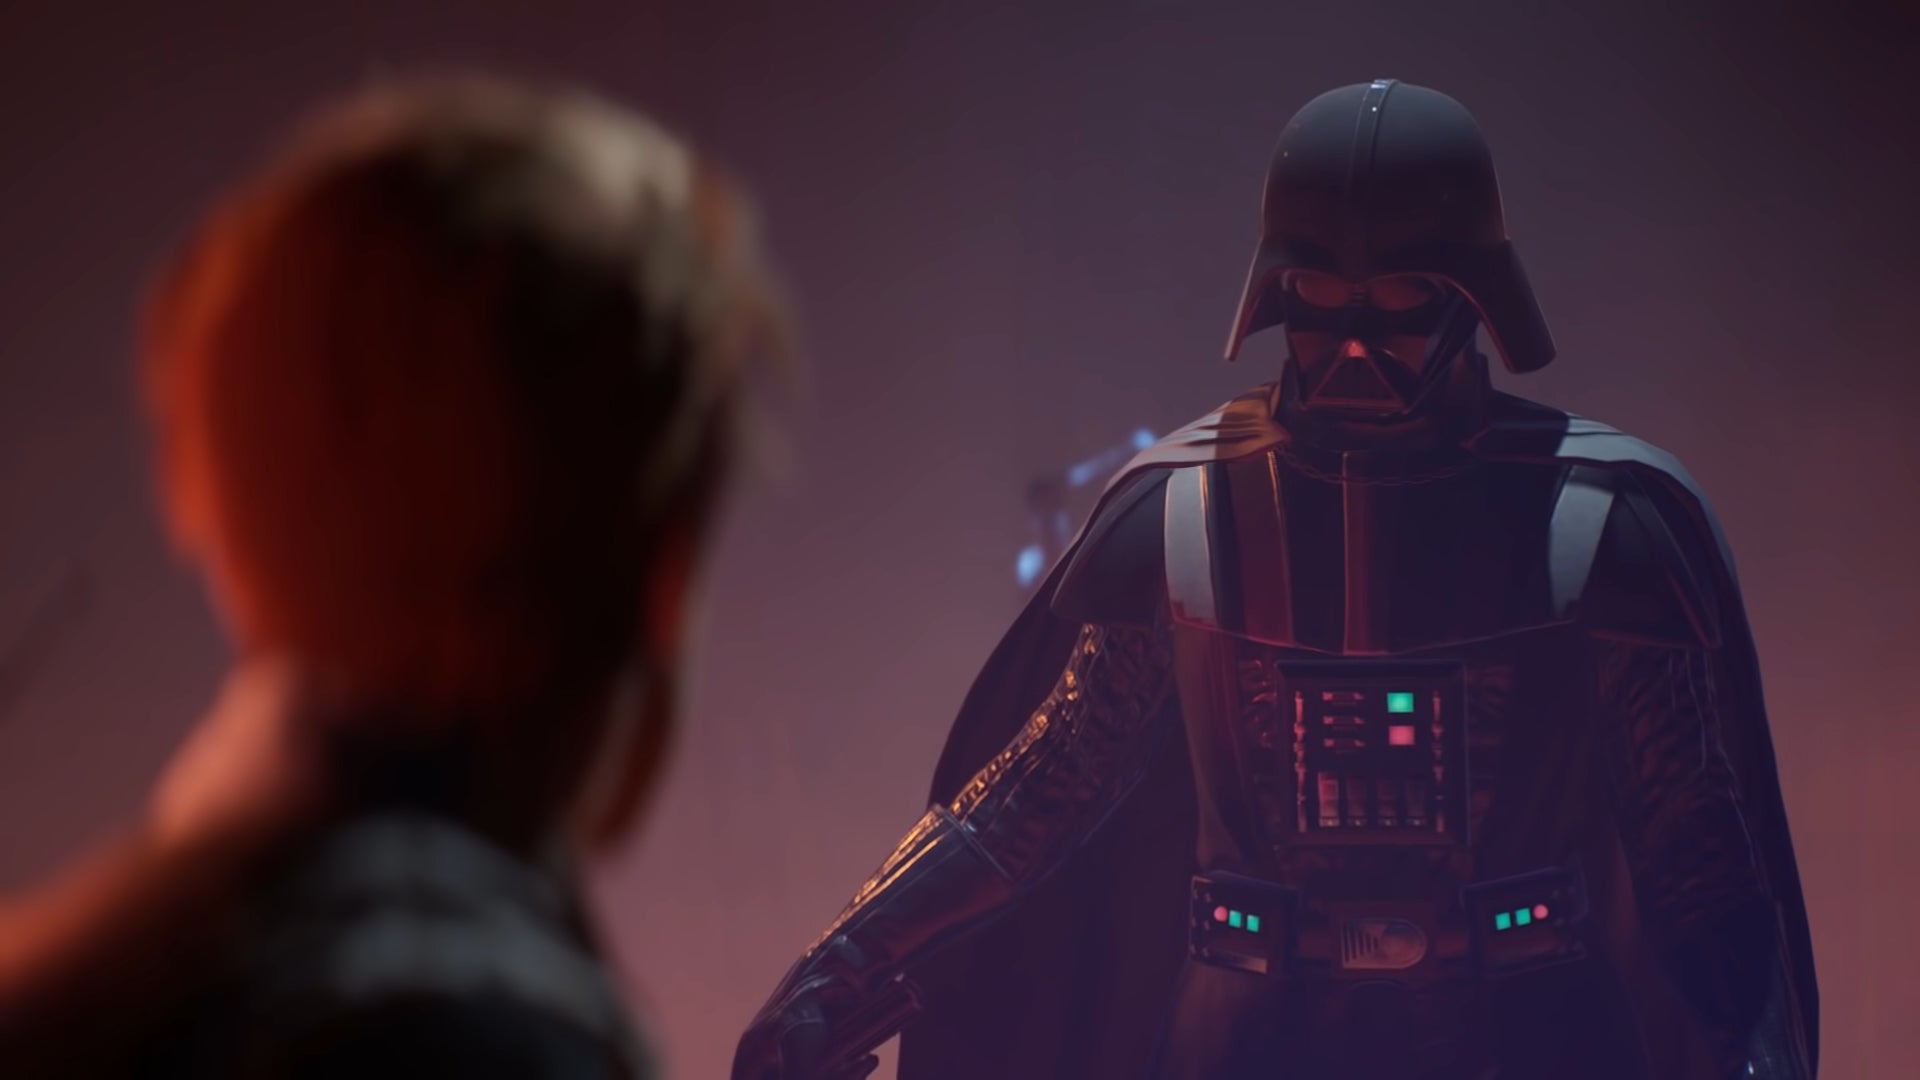 Cal faces down against Darth Vader at the end of Star Wars Jedi: Fallen Order.